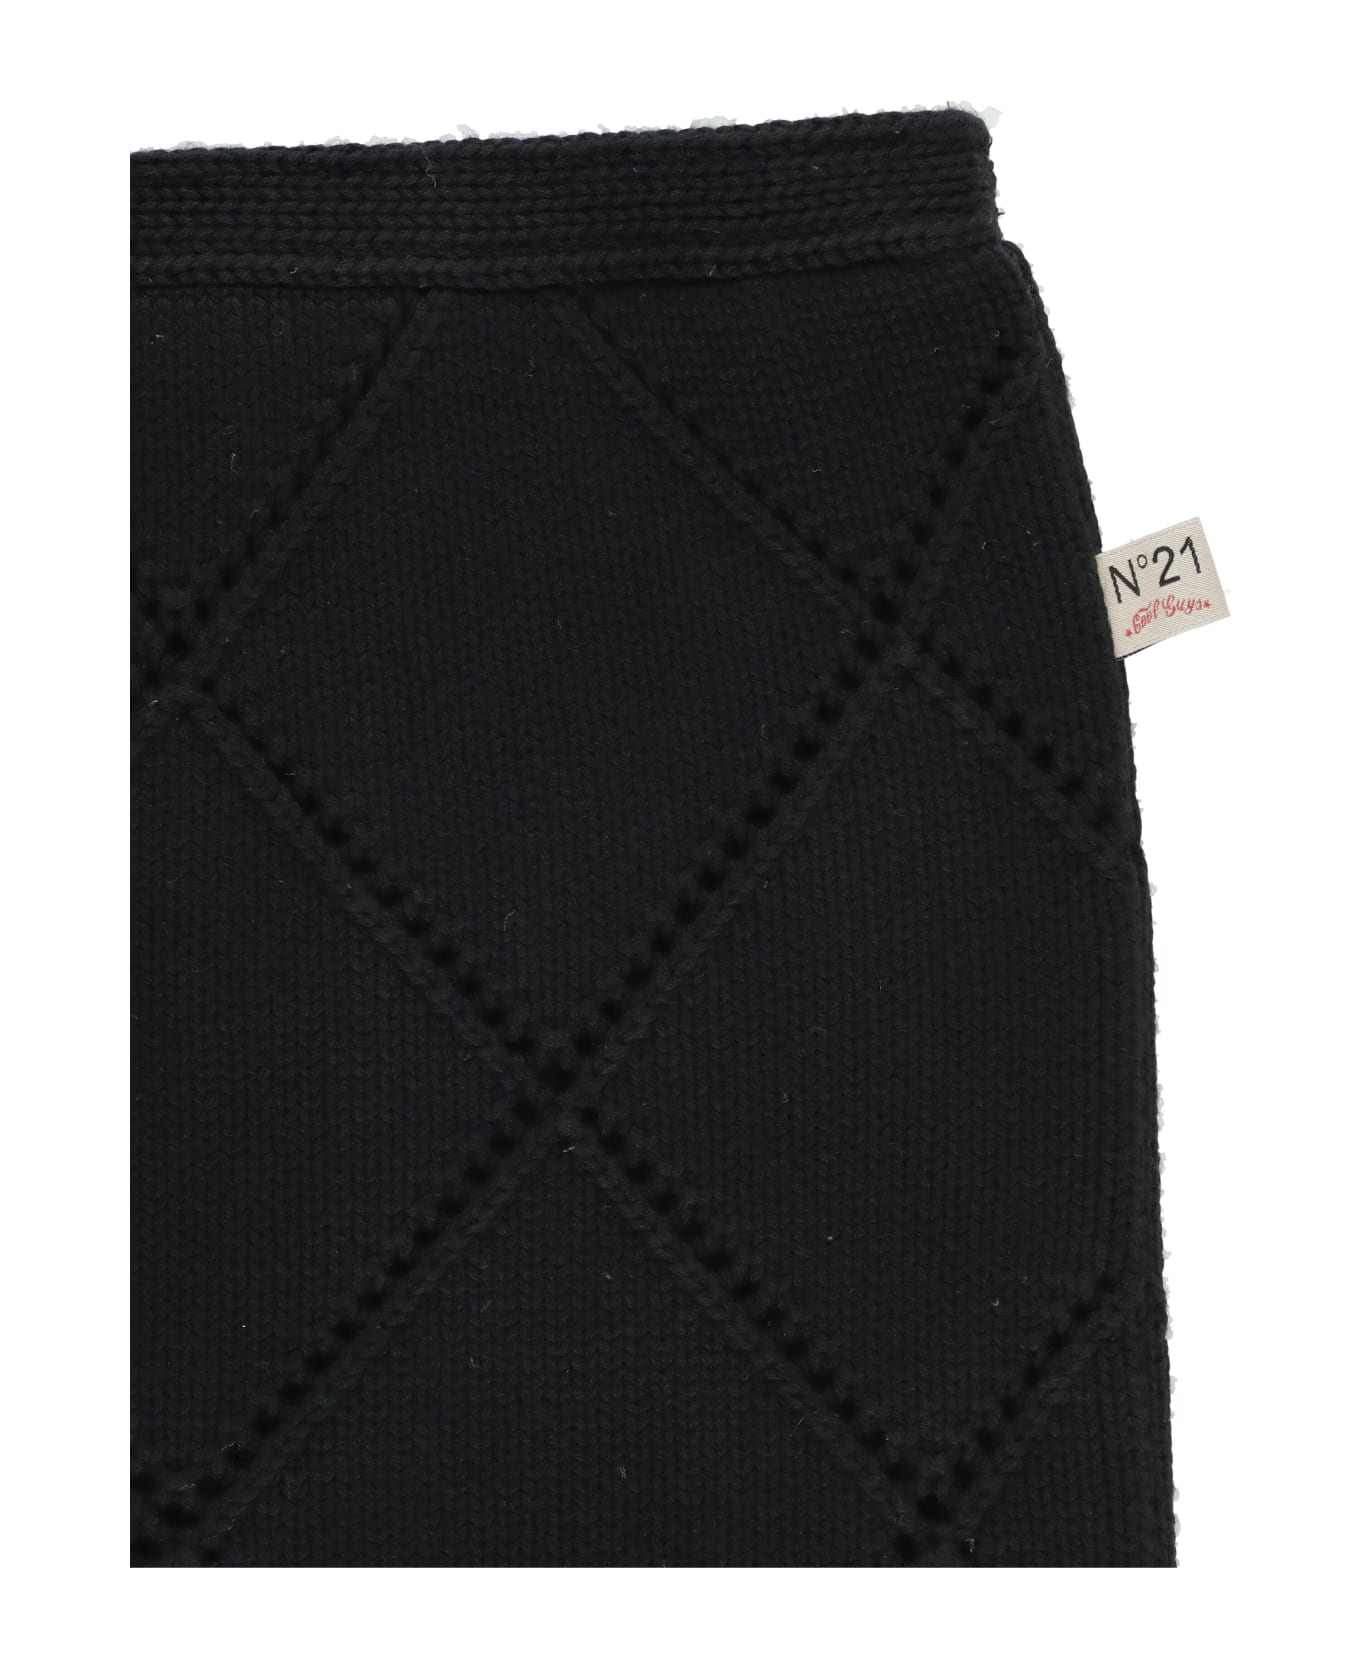 N.21 Wool And Cotton Skirt - Black